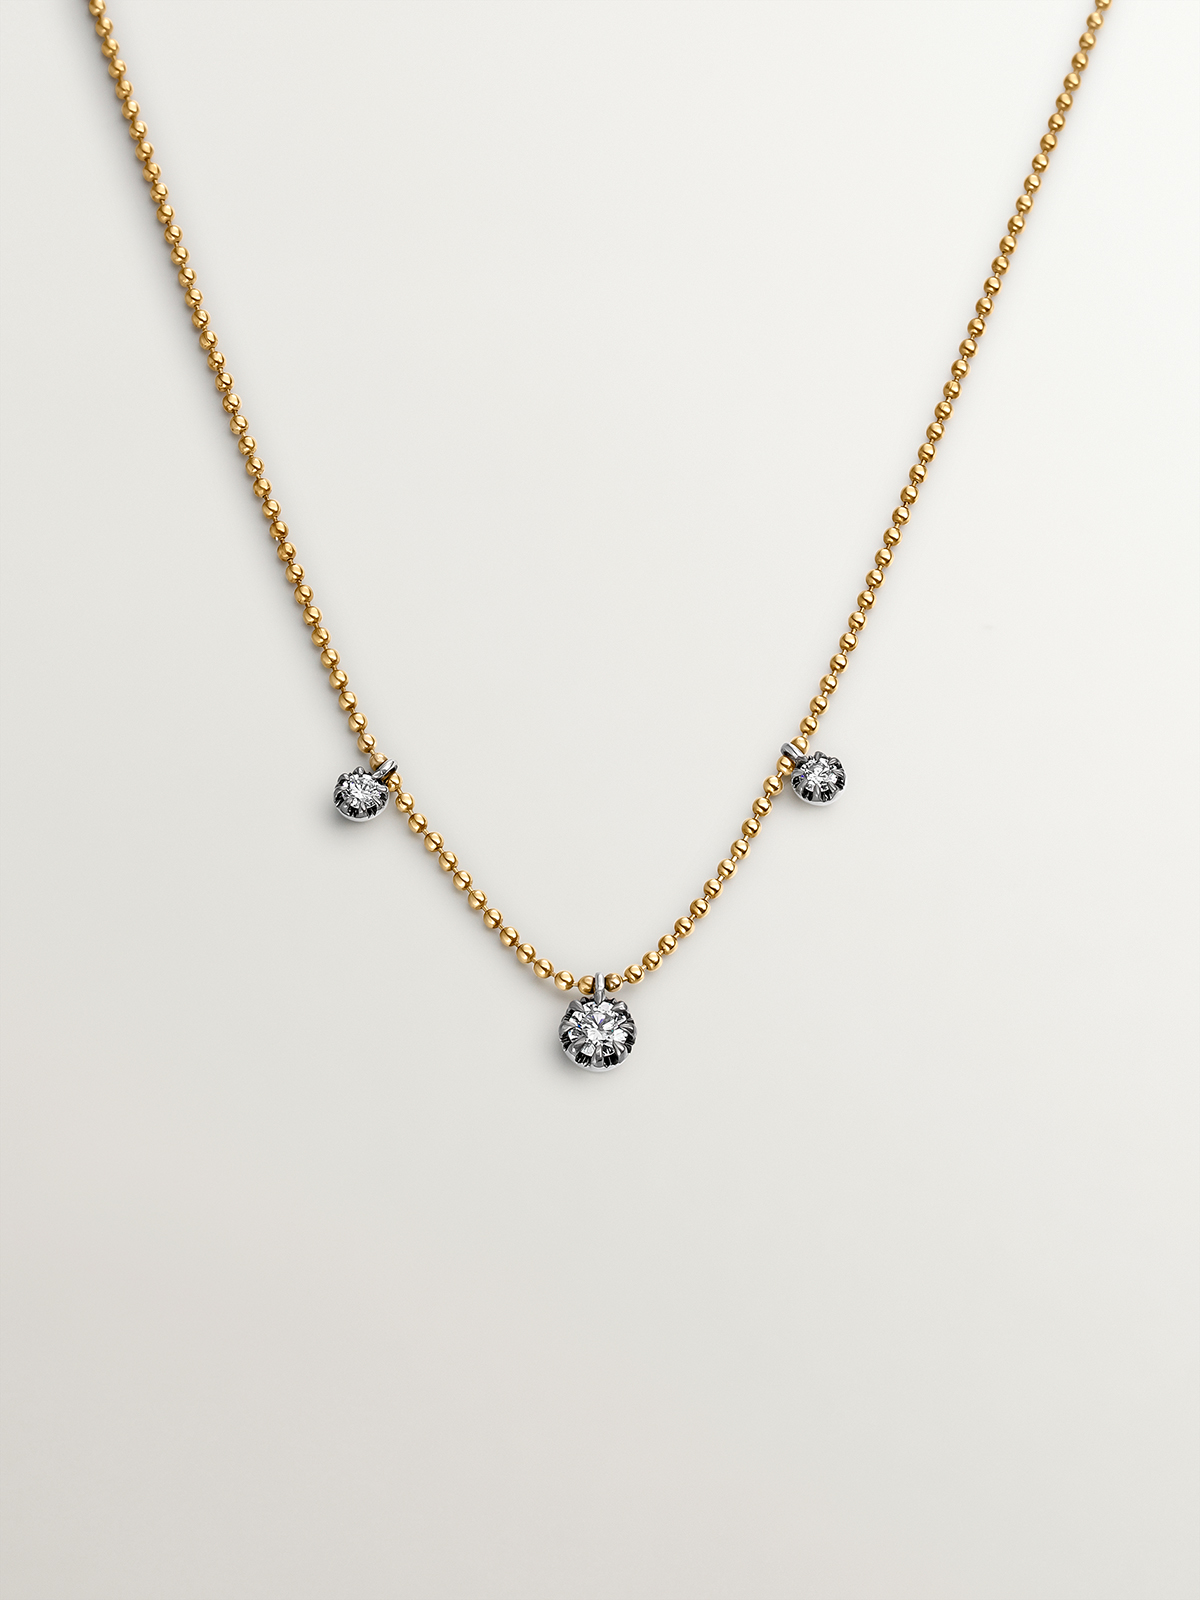 18K yellow gold necklace with aged effect and brilliant-cut diamonds